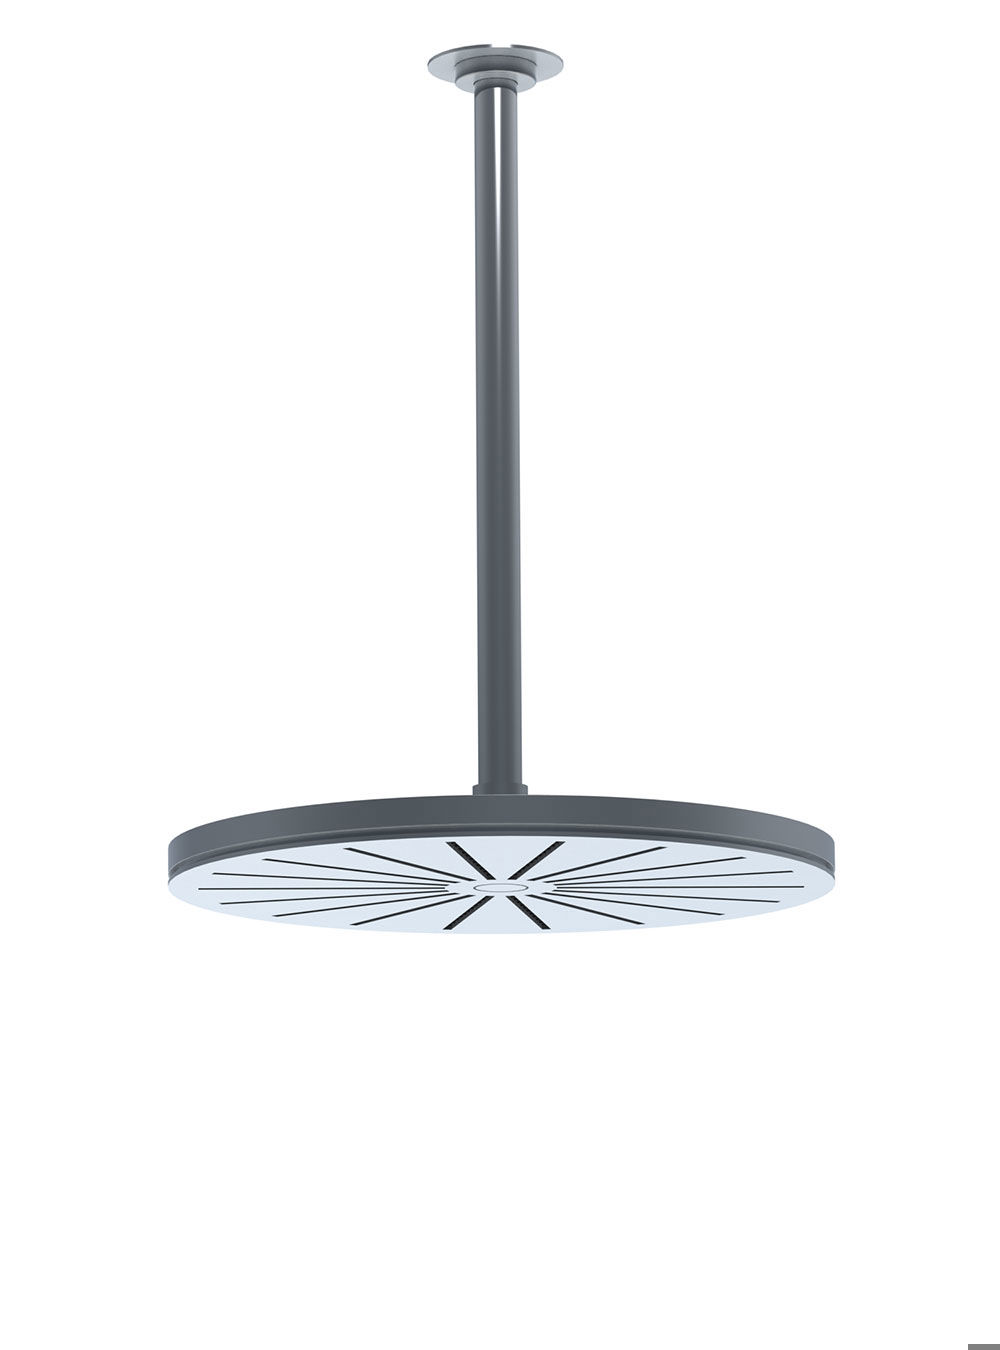 060A+200: Head shower, round, ceiling-mounted, extended 200 mm.